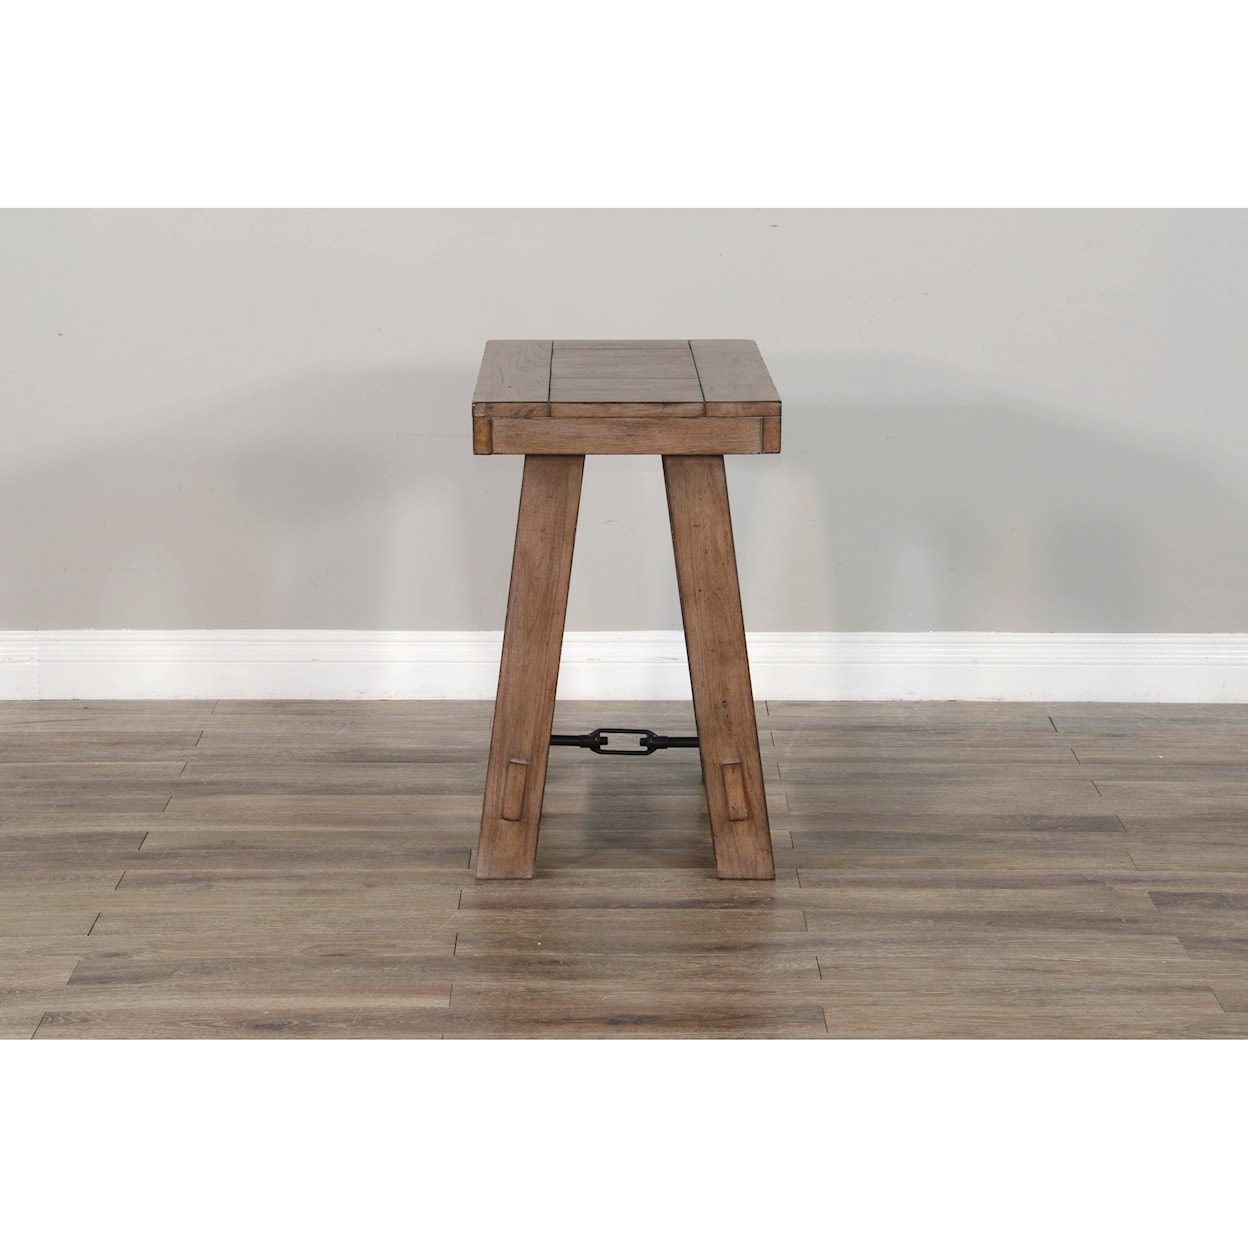 Sunny Designs Doe Valley Chair Side Table